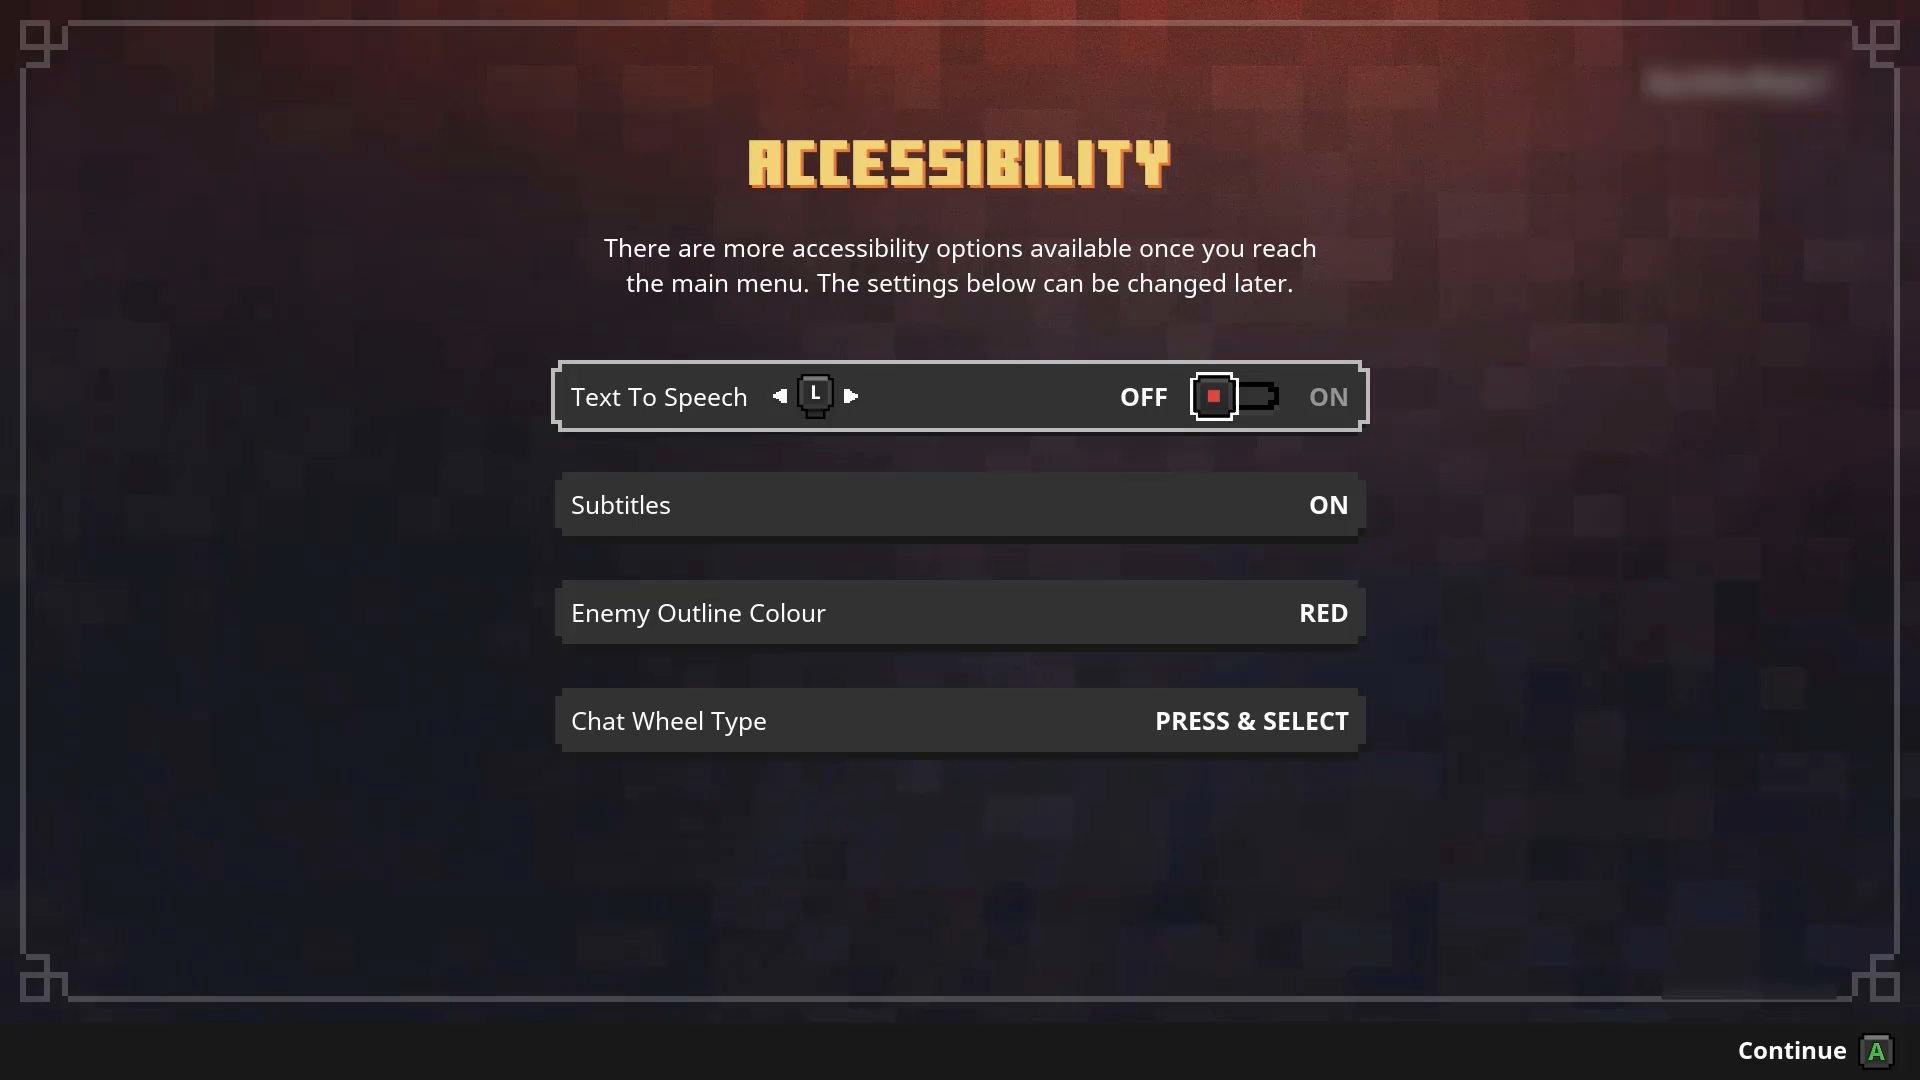 A screenshot of the first-launch accessibility prompt menu in Minecraft Dungeons. The menu provides the ability to toggle Text-to-Speech on or off, toggle subtitles on or off, choose an enemy outline color, and choose a chat wheel type.